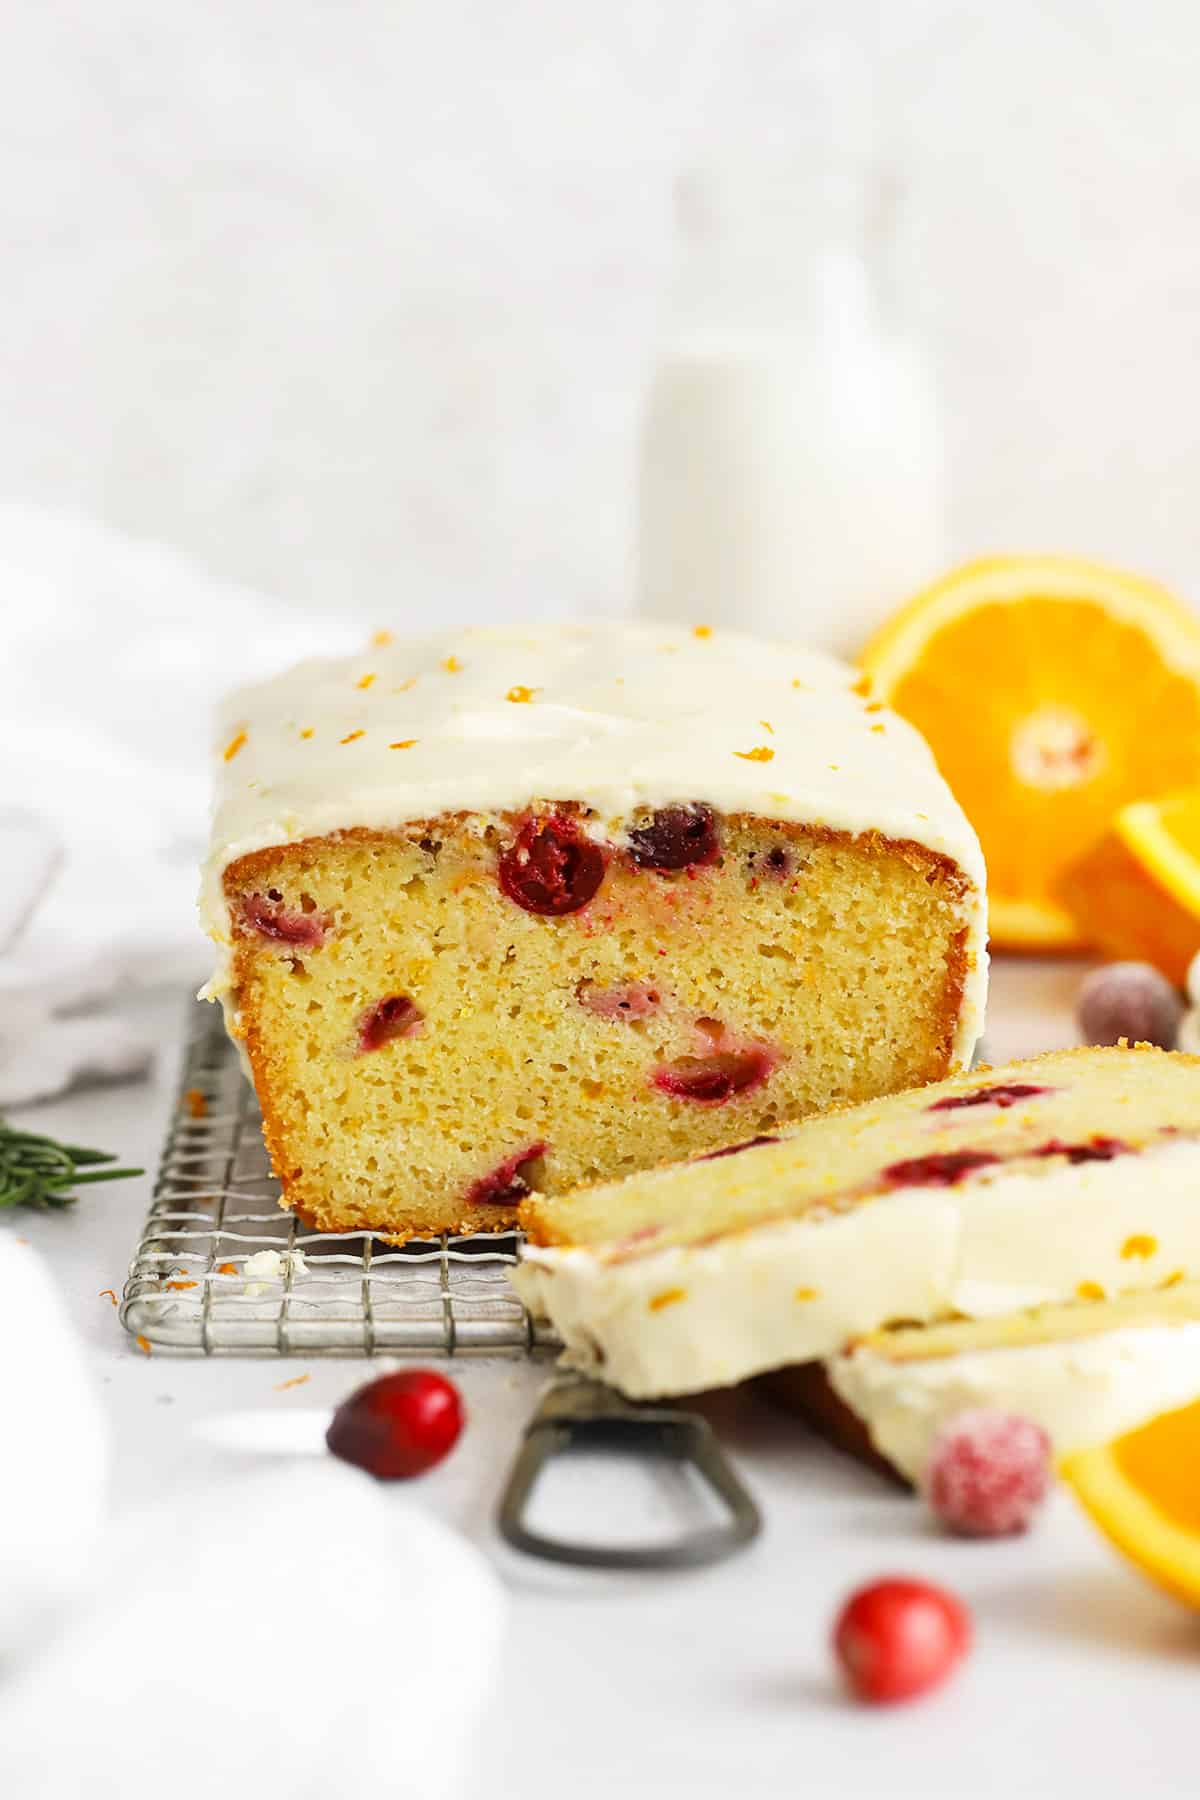 Front view of gluten-free orange cranberry loaf cake sliced, so you can see the soft, fluffy texture inside